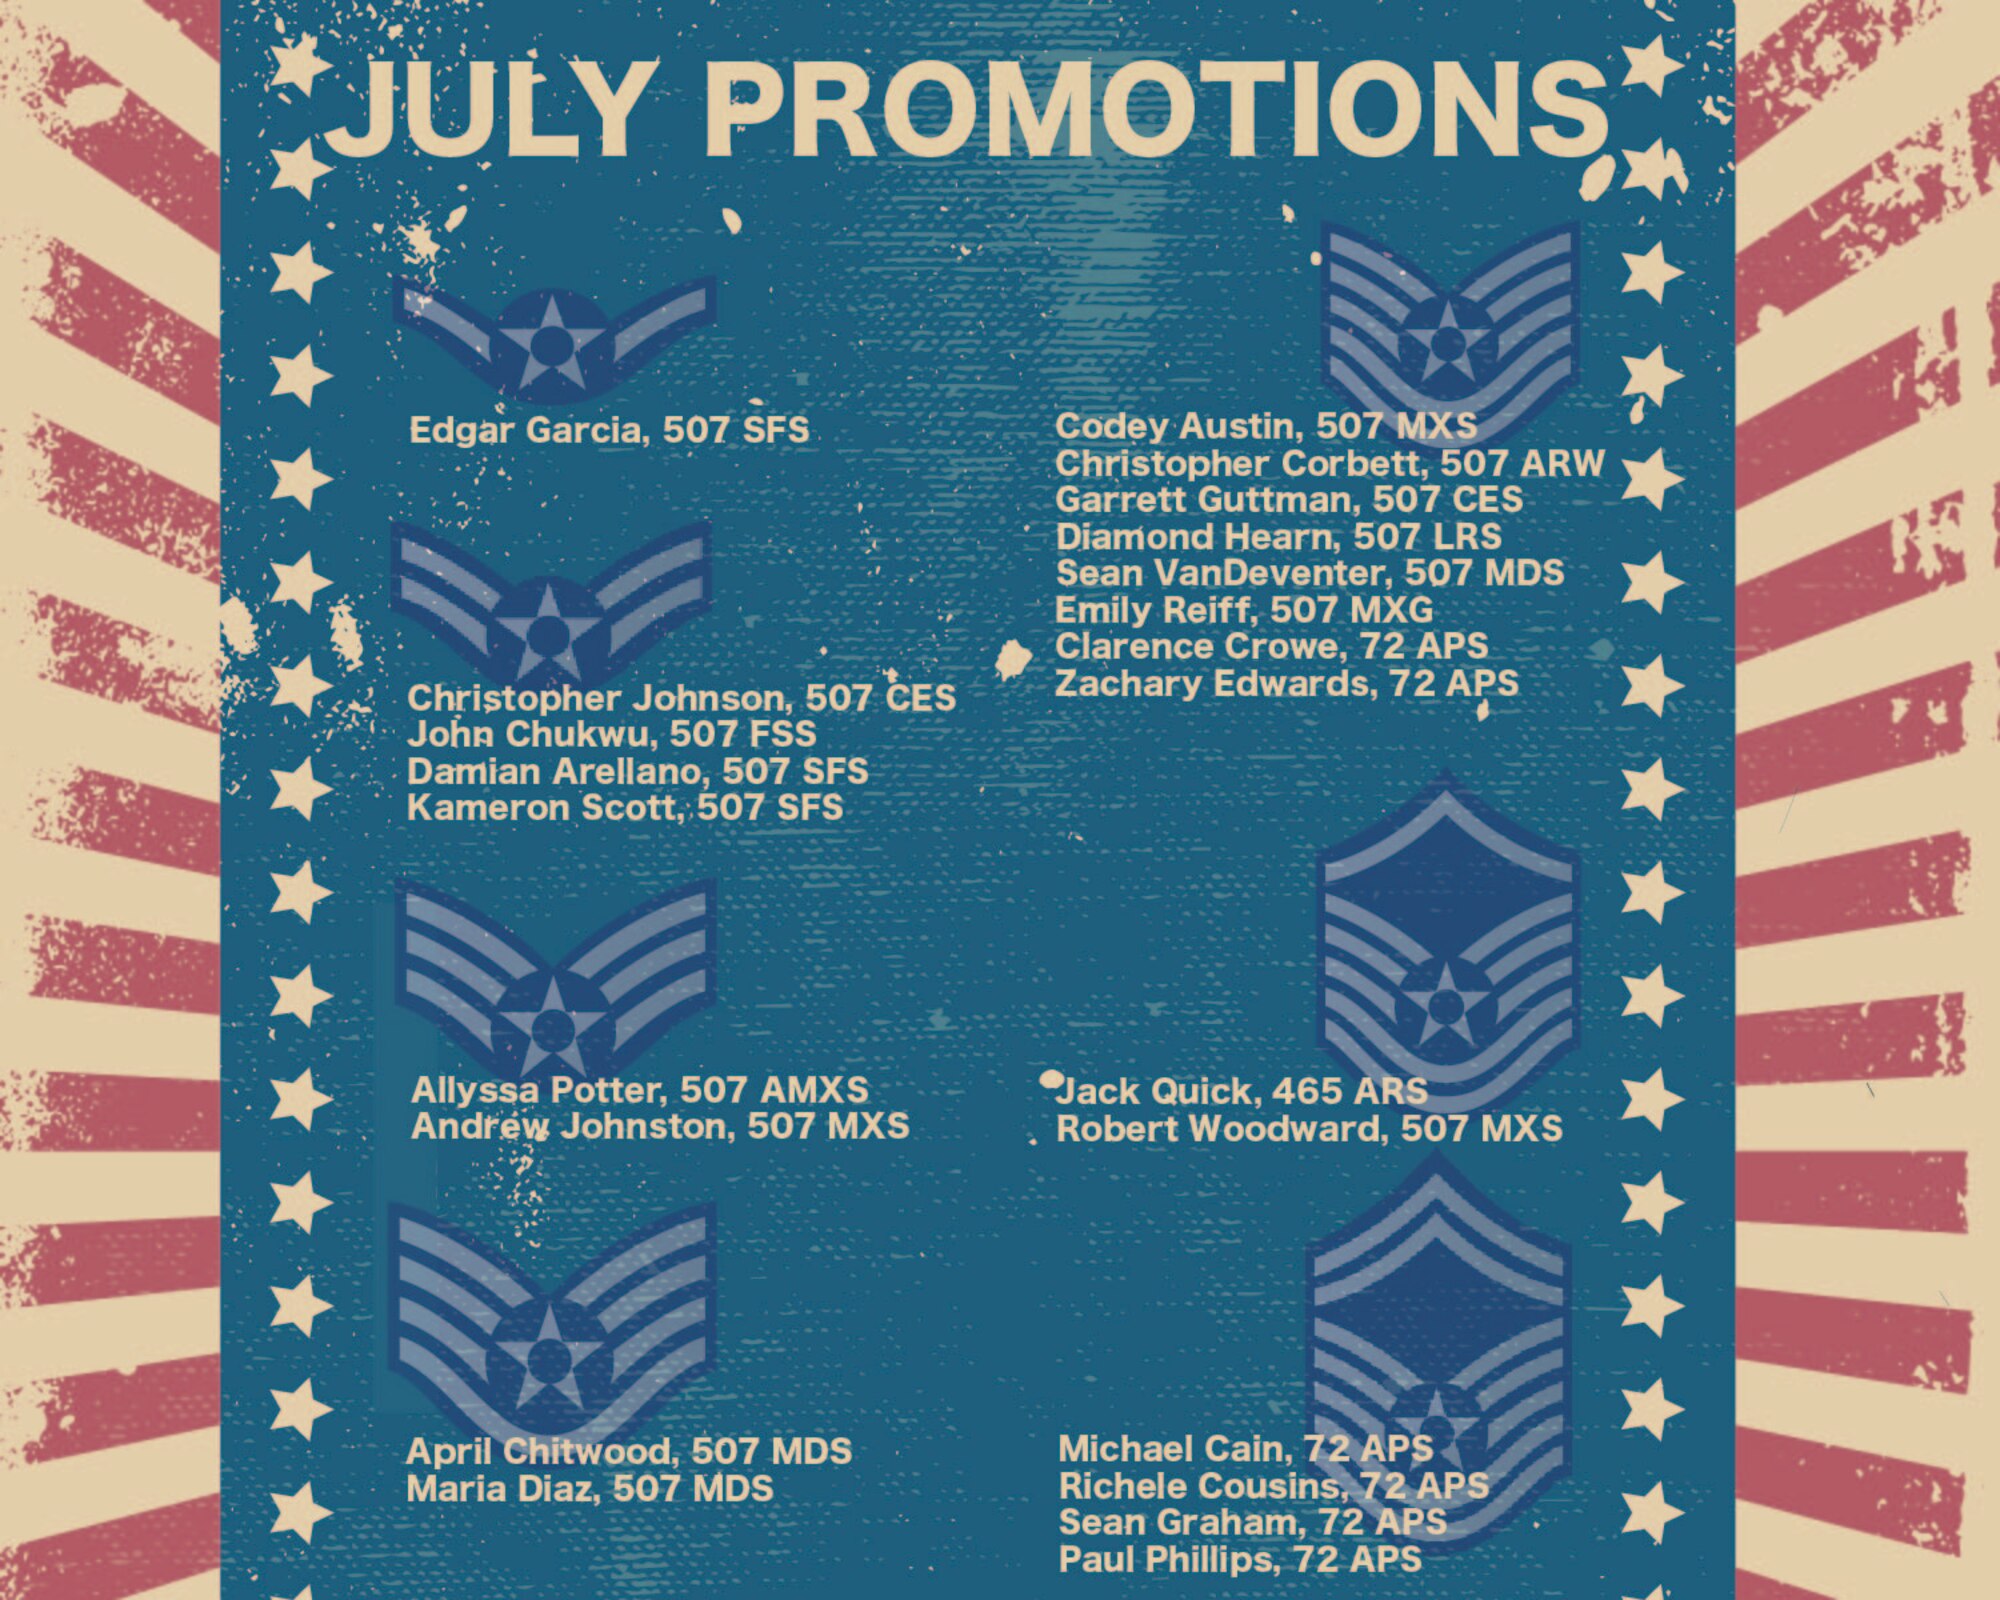 Promotion graphic for July 2021